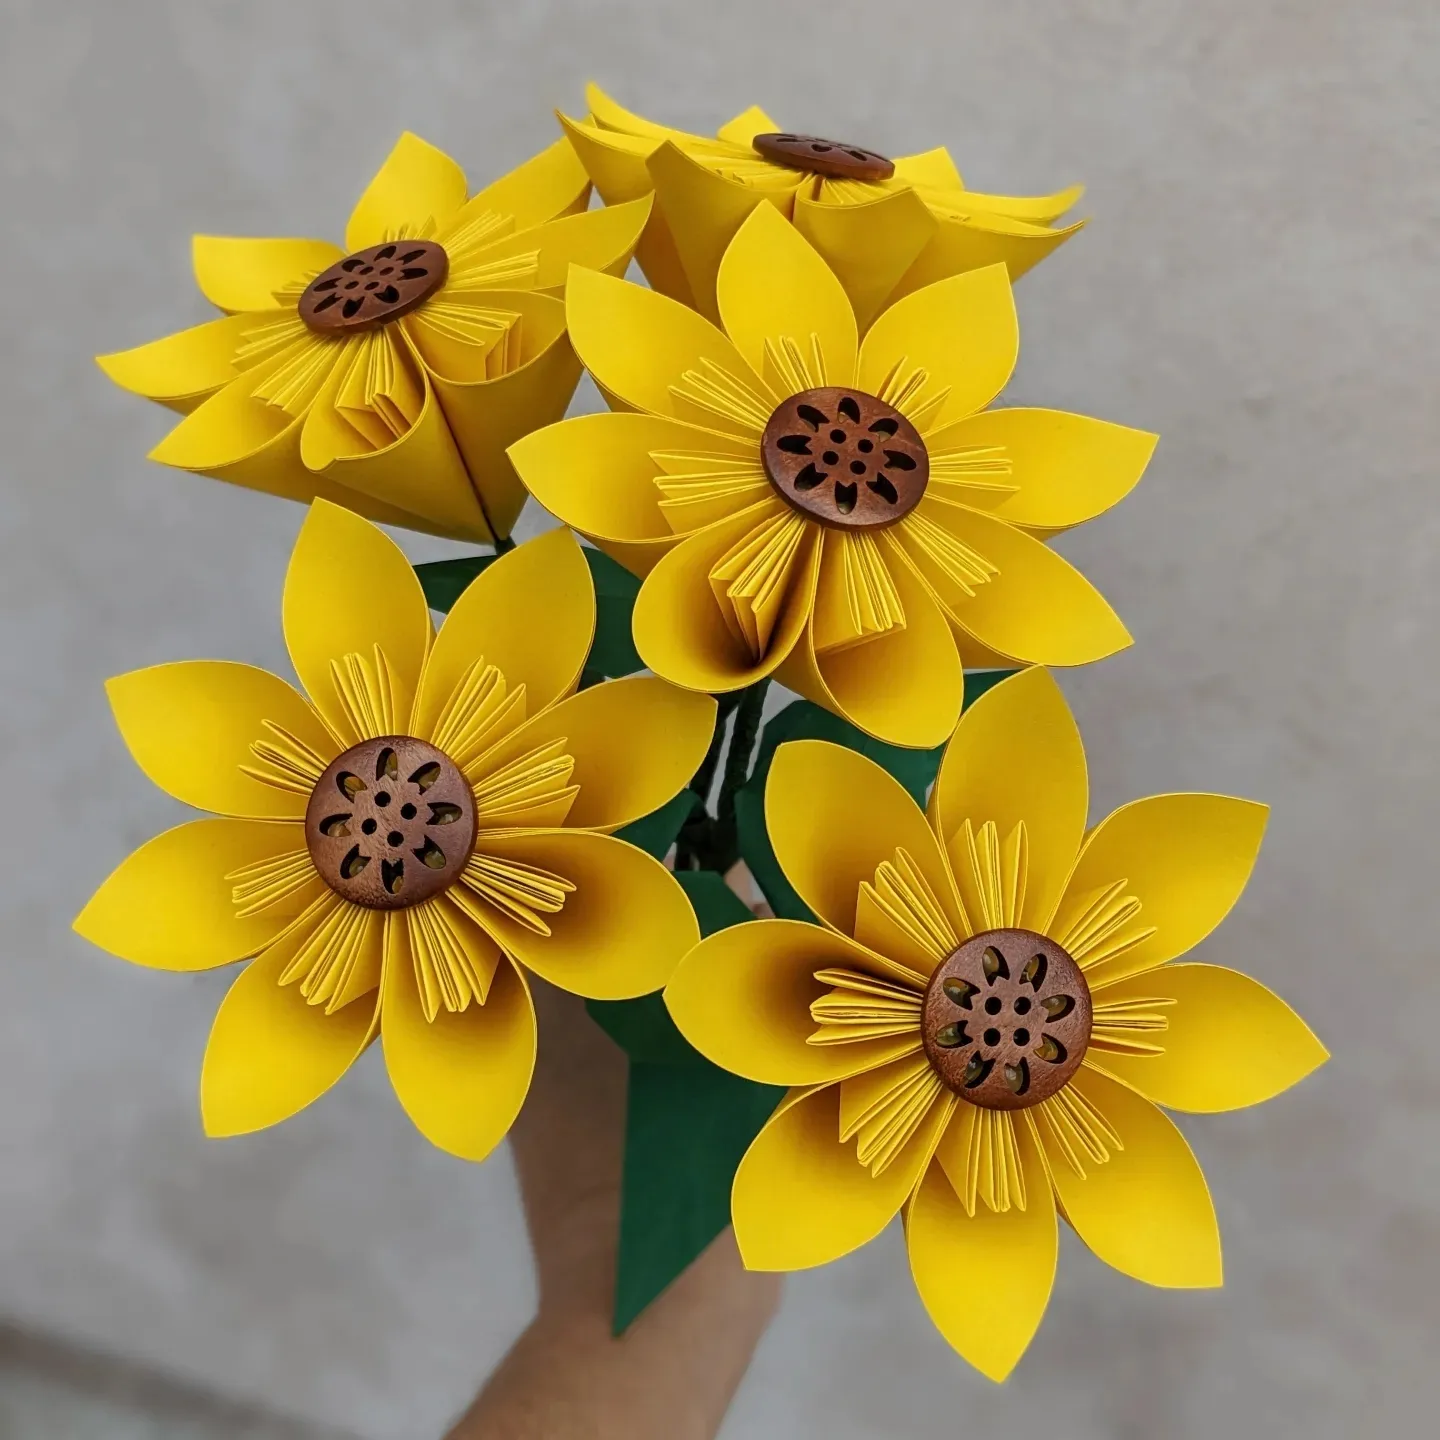 Bouquet of 5 origami paper sunflowers folded from sunshine yellow recycled paper